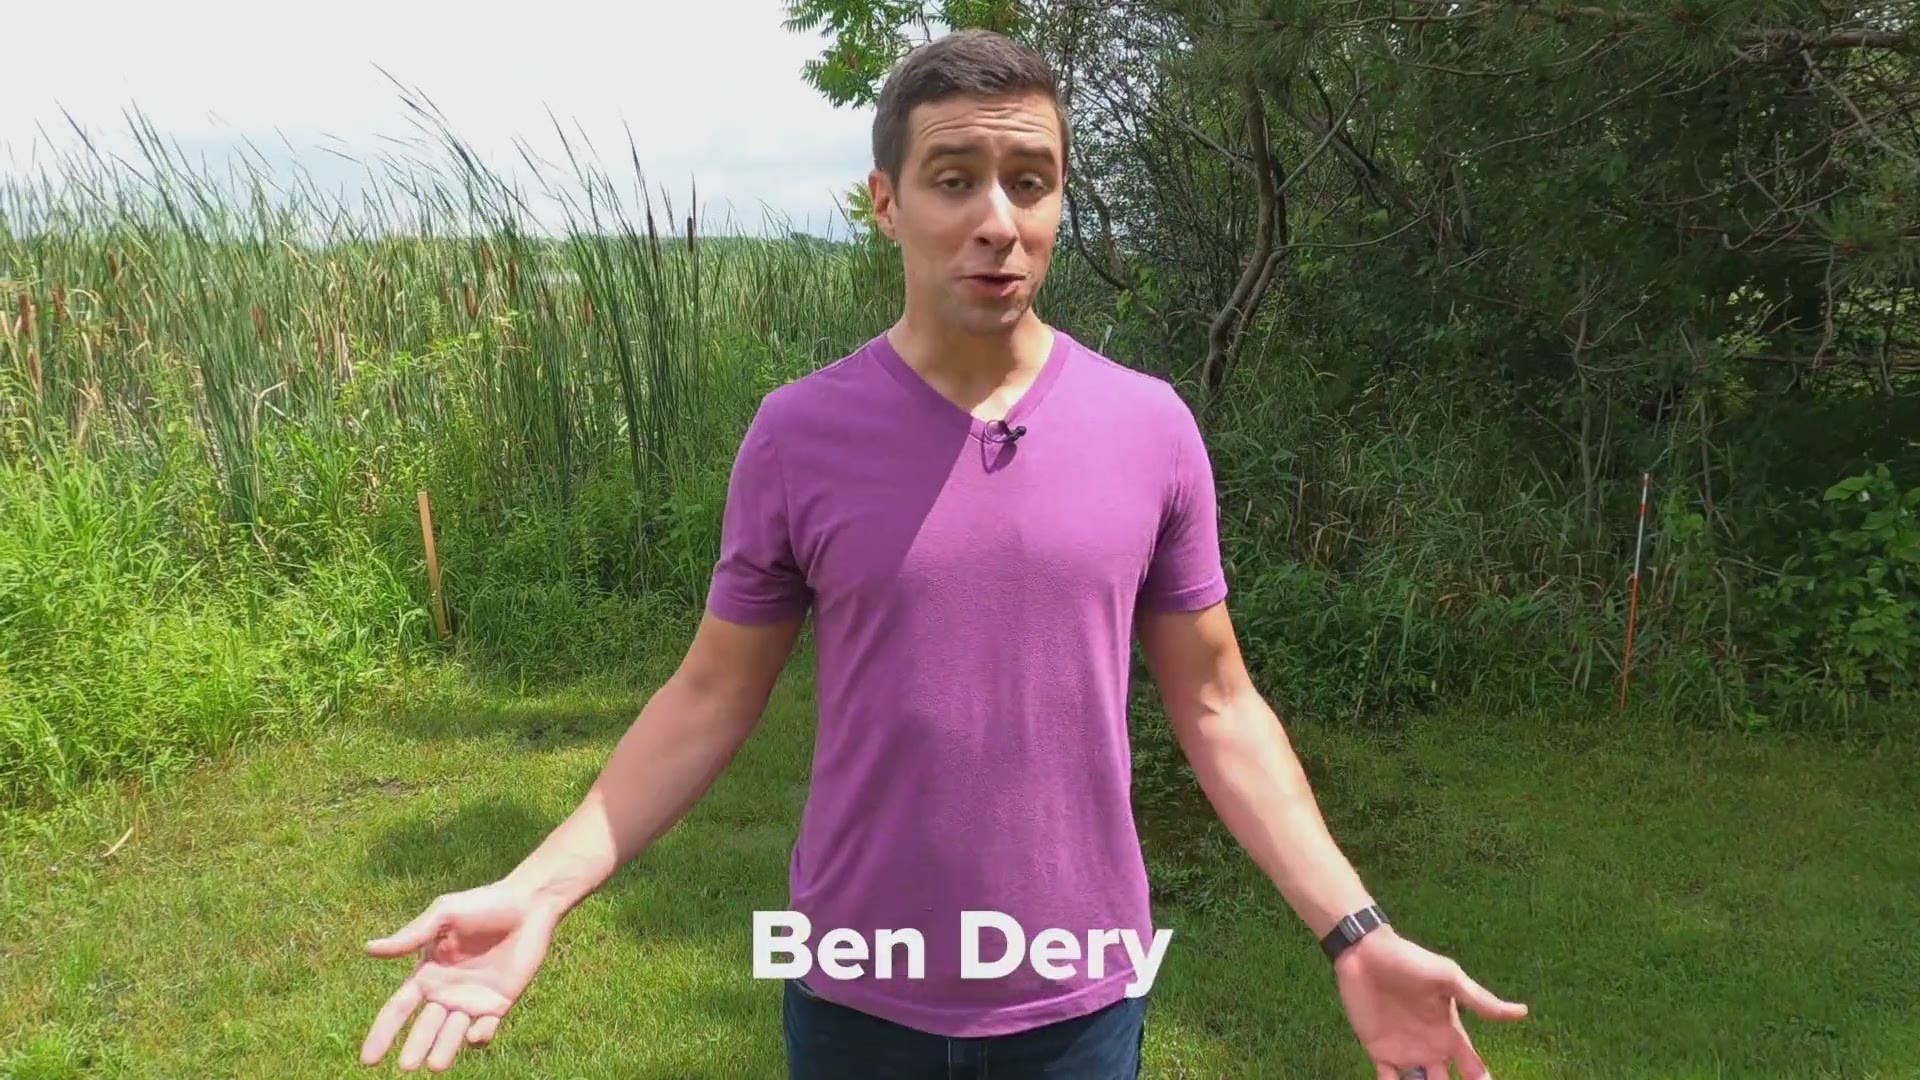 Here are 11 fun facts to get you acquainted with KARE 11 meteorologist and MN native Ben Dery.